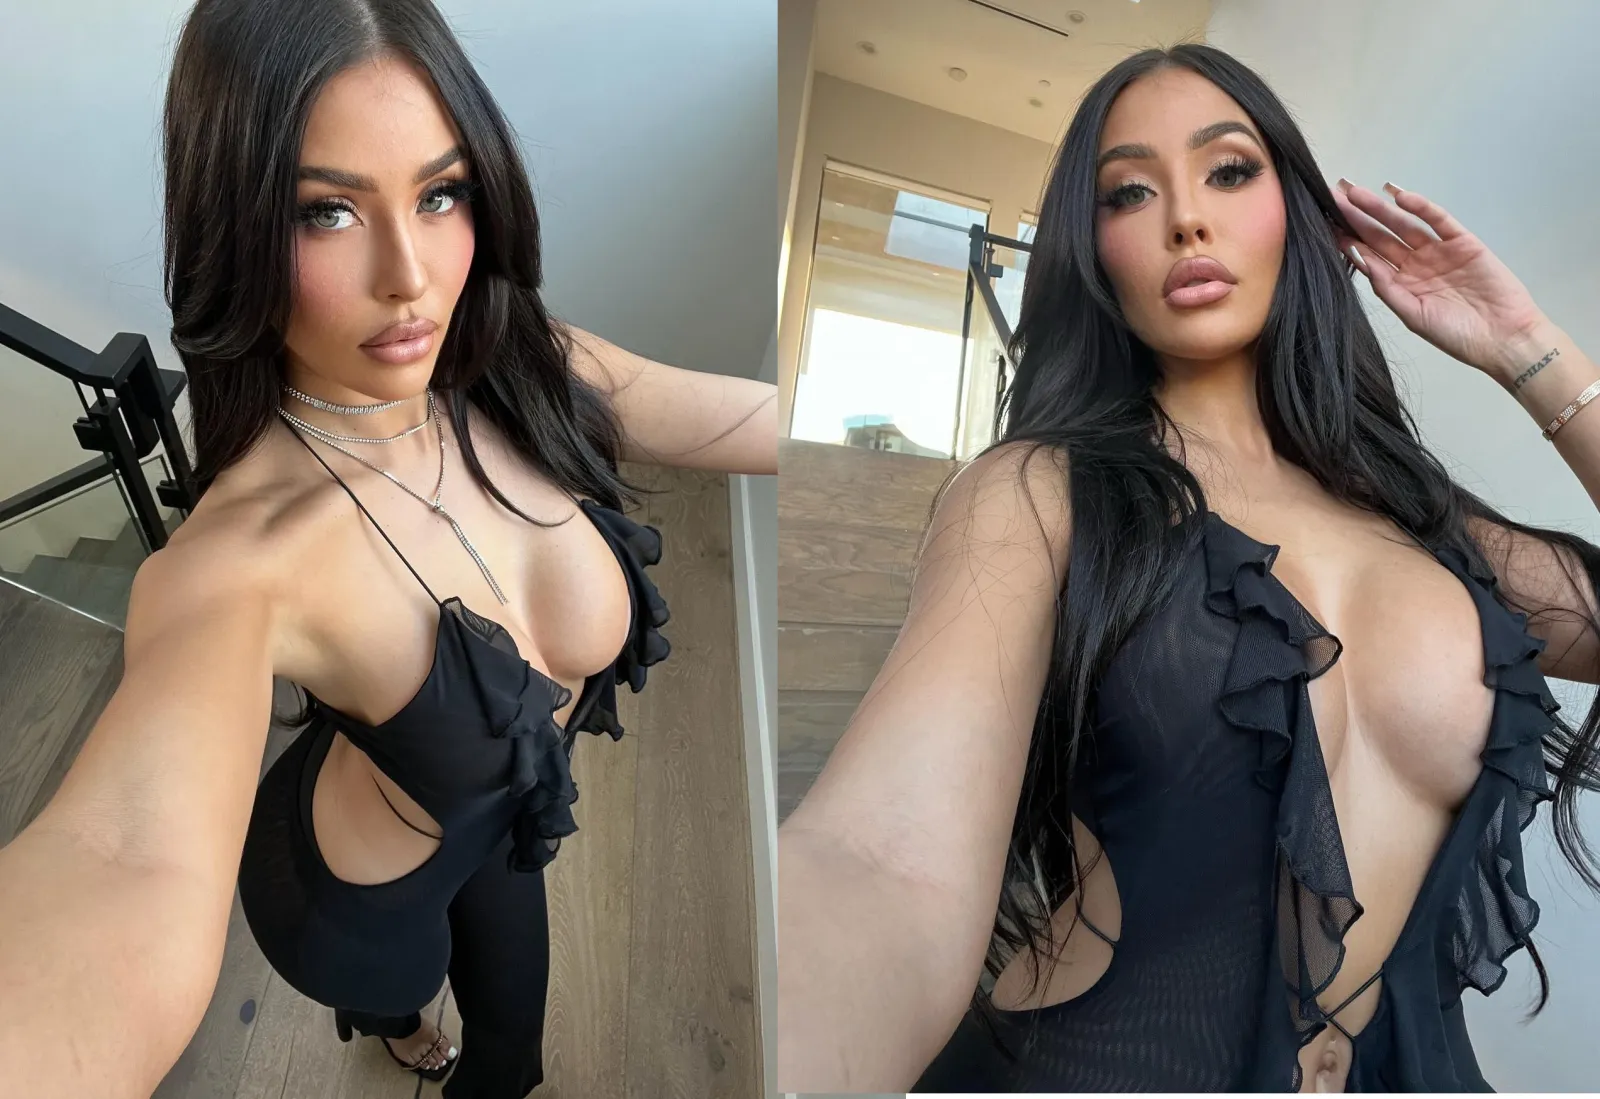 Fashion Nova Unleashes Showstopper Arlene Mesh Jumpsuit Takes Instagram by Storm with Cheeky Caption - Gossibox.com